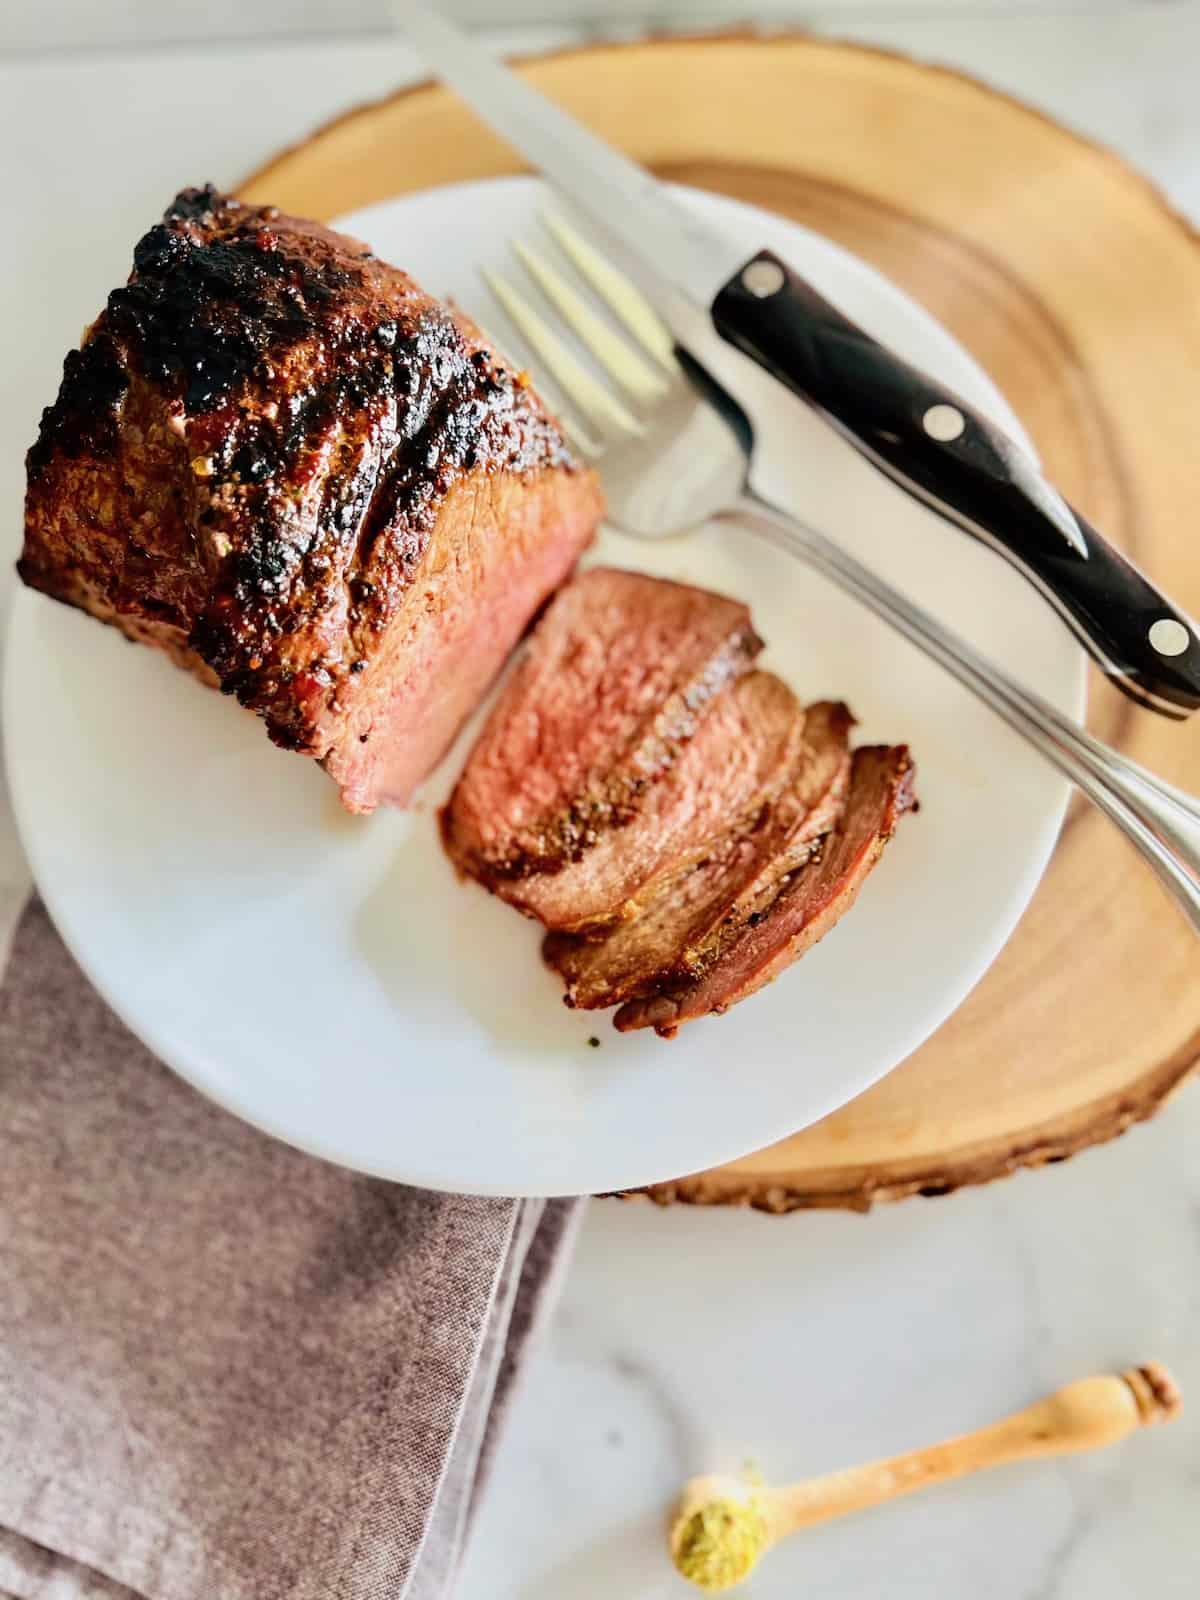 Tri-Tip roast plated, showing how to slice the meat against the grain.